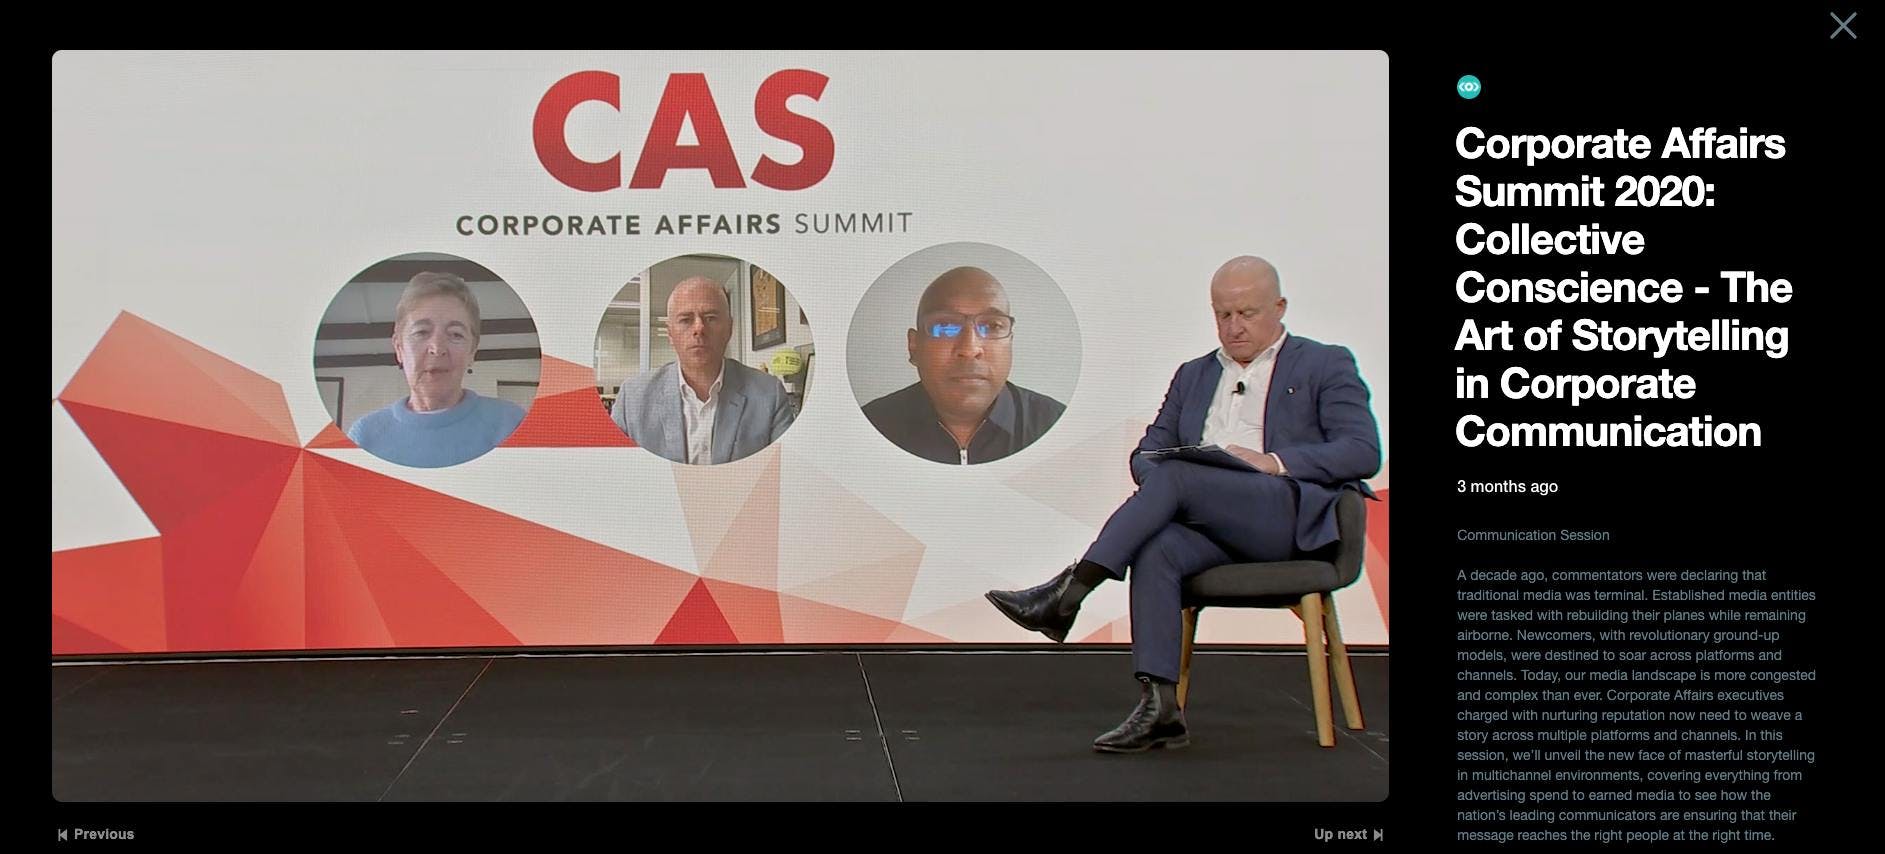 A live recording of the virtual 2020 Corporate Affairs Summit in Sydney, where Meltwater participated in a keynote speech and panel discussion